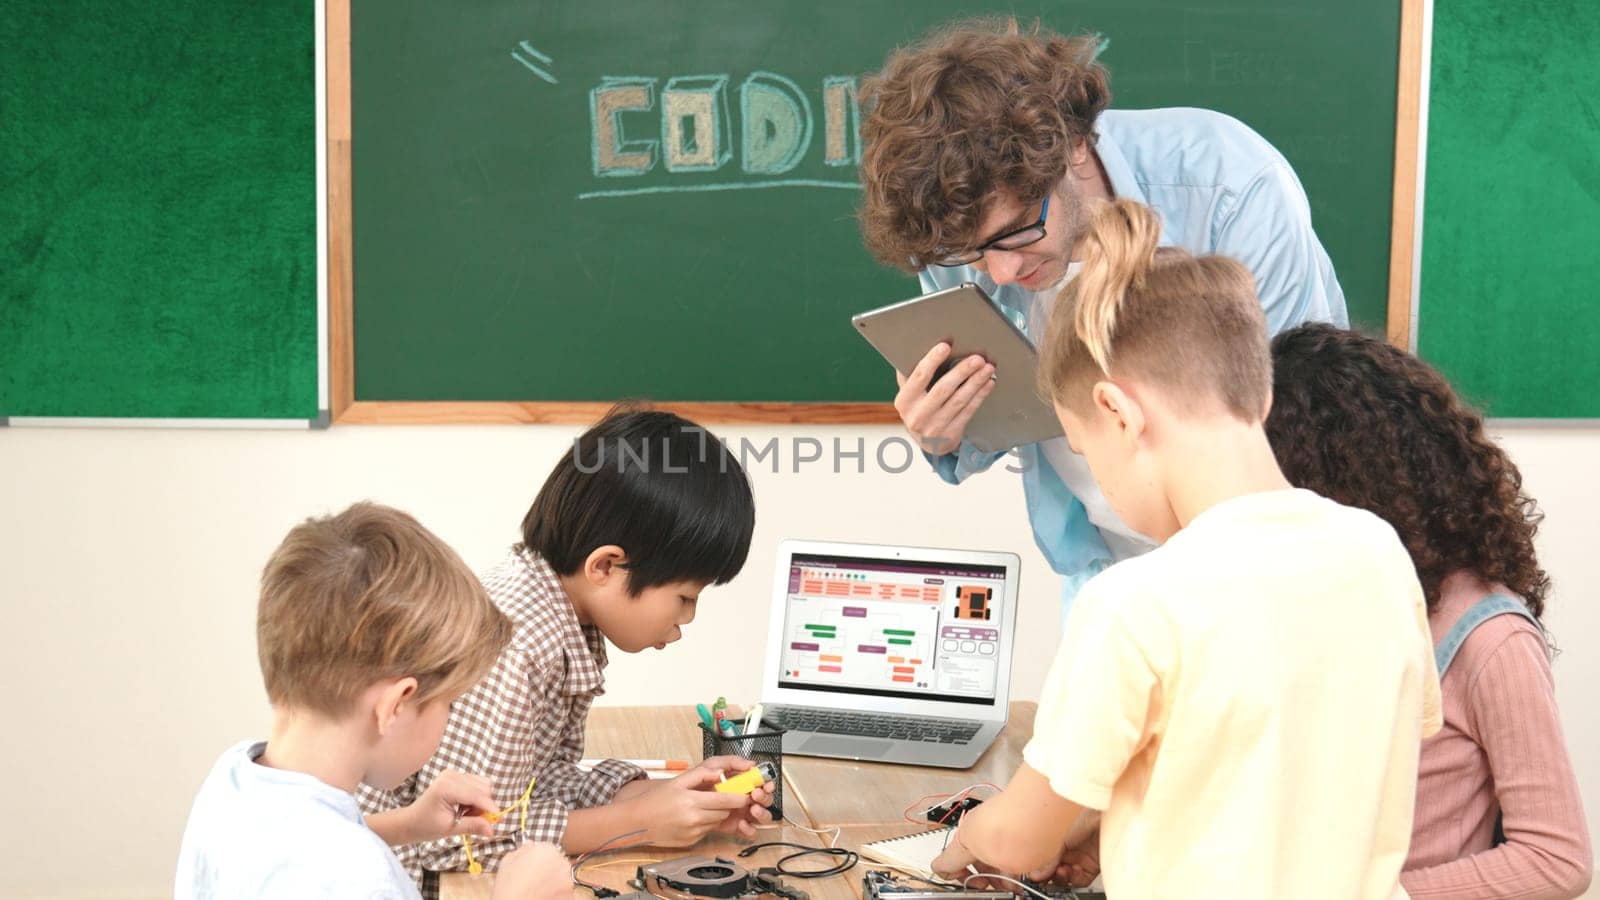 Group of diverse student working together on main board with laptop screen display engineering prompt written while teacher hold tablet and explain online software at STEM technology class. Pedagogy.